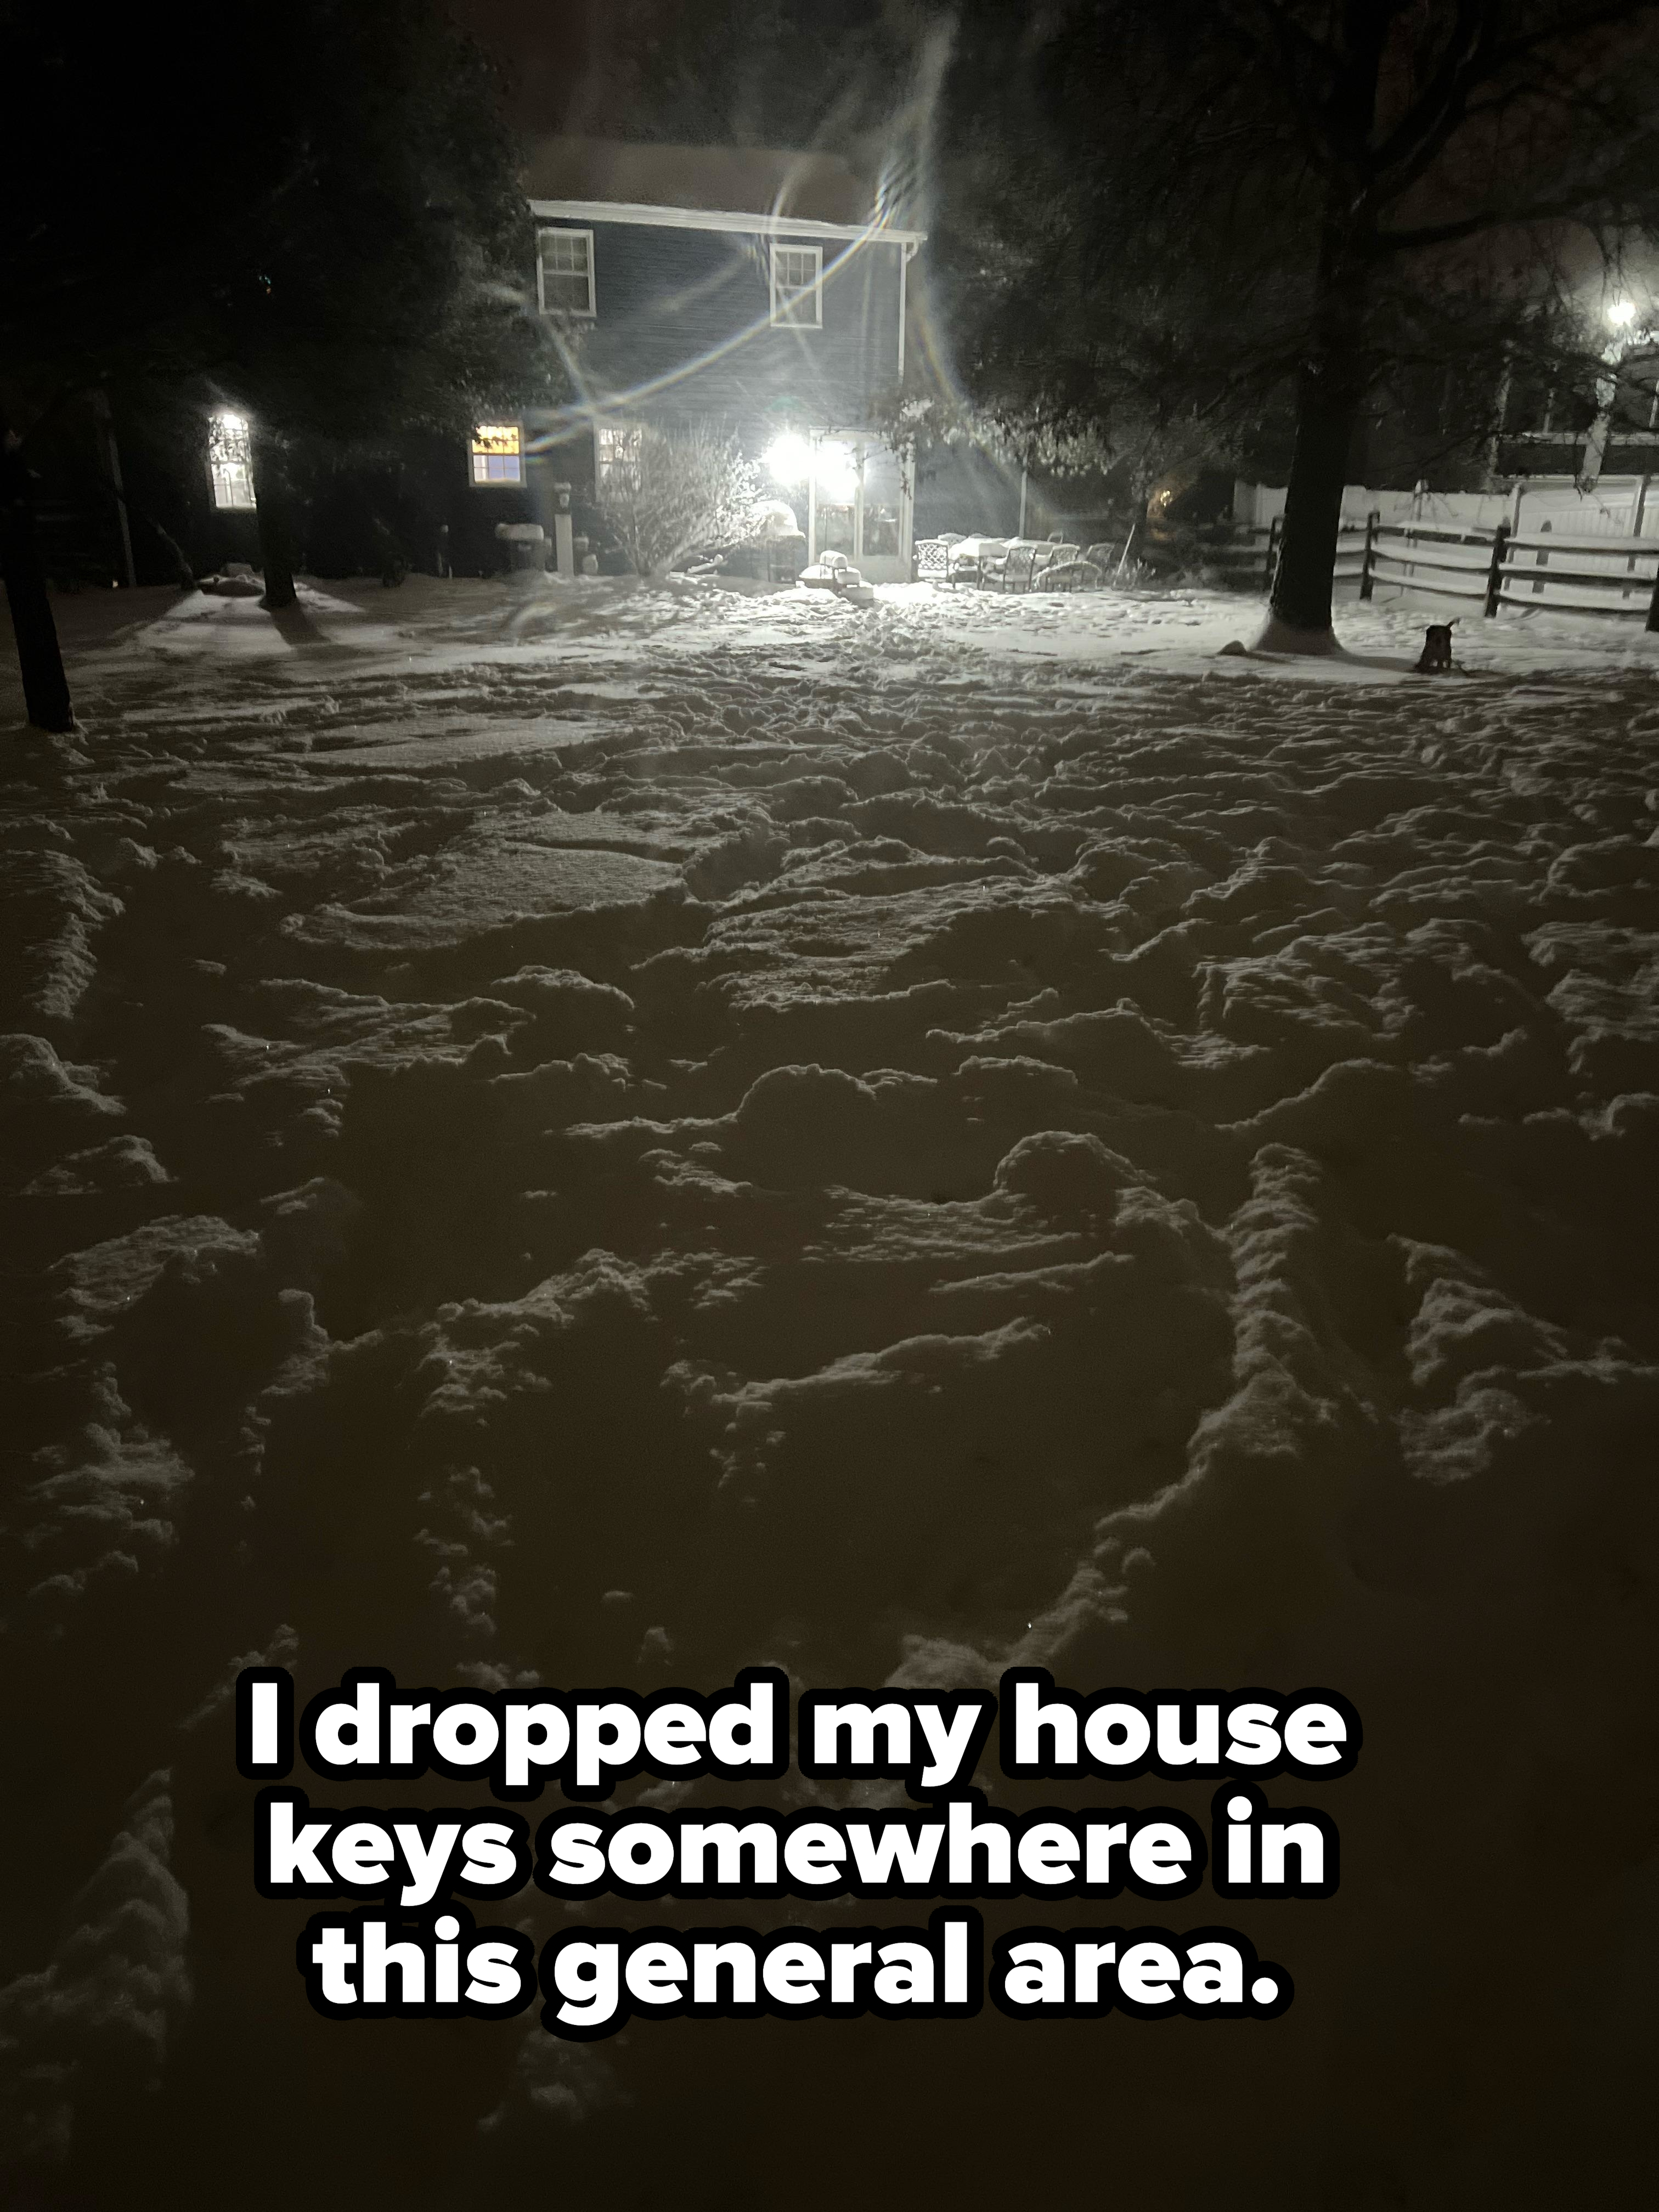 &quot;I dropped my house keys somewhere in this general area,&quot; with picture of deep snow in a large front yard